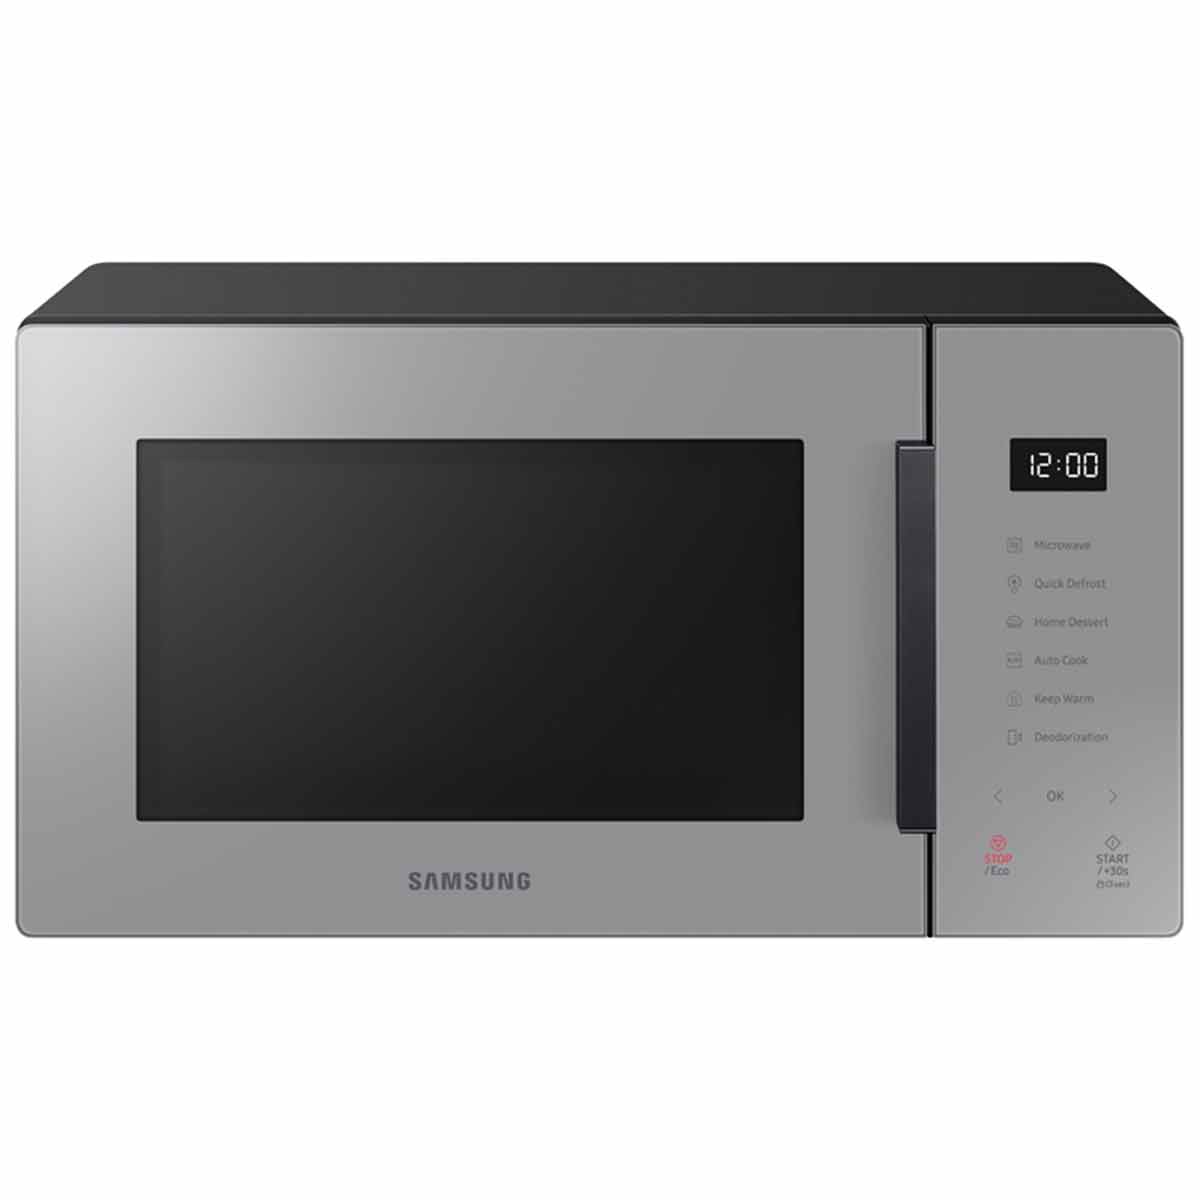 Samsung MS23T5018AG 23 Litre Solo Microwave with Touch Control Panel - Grey